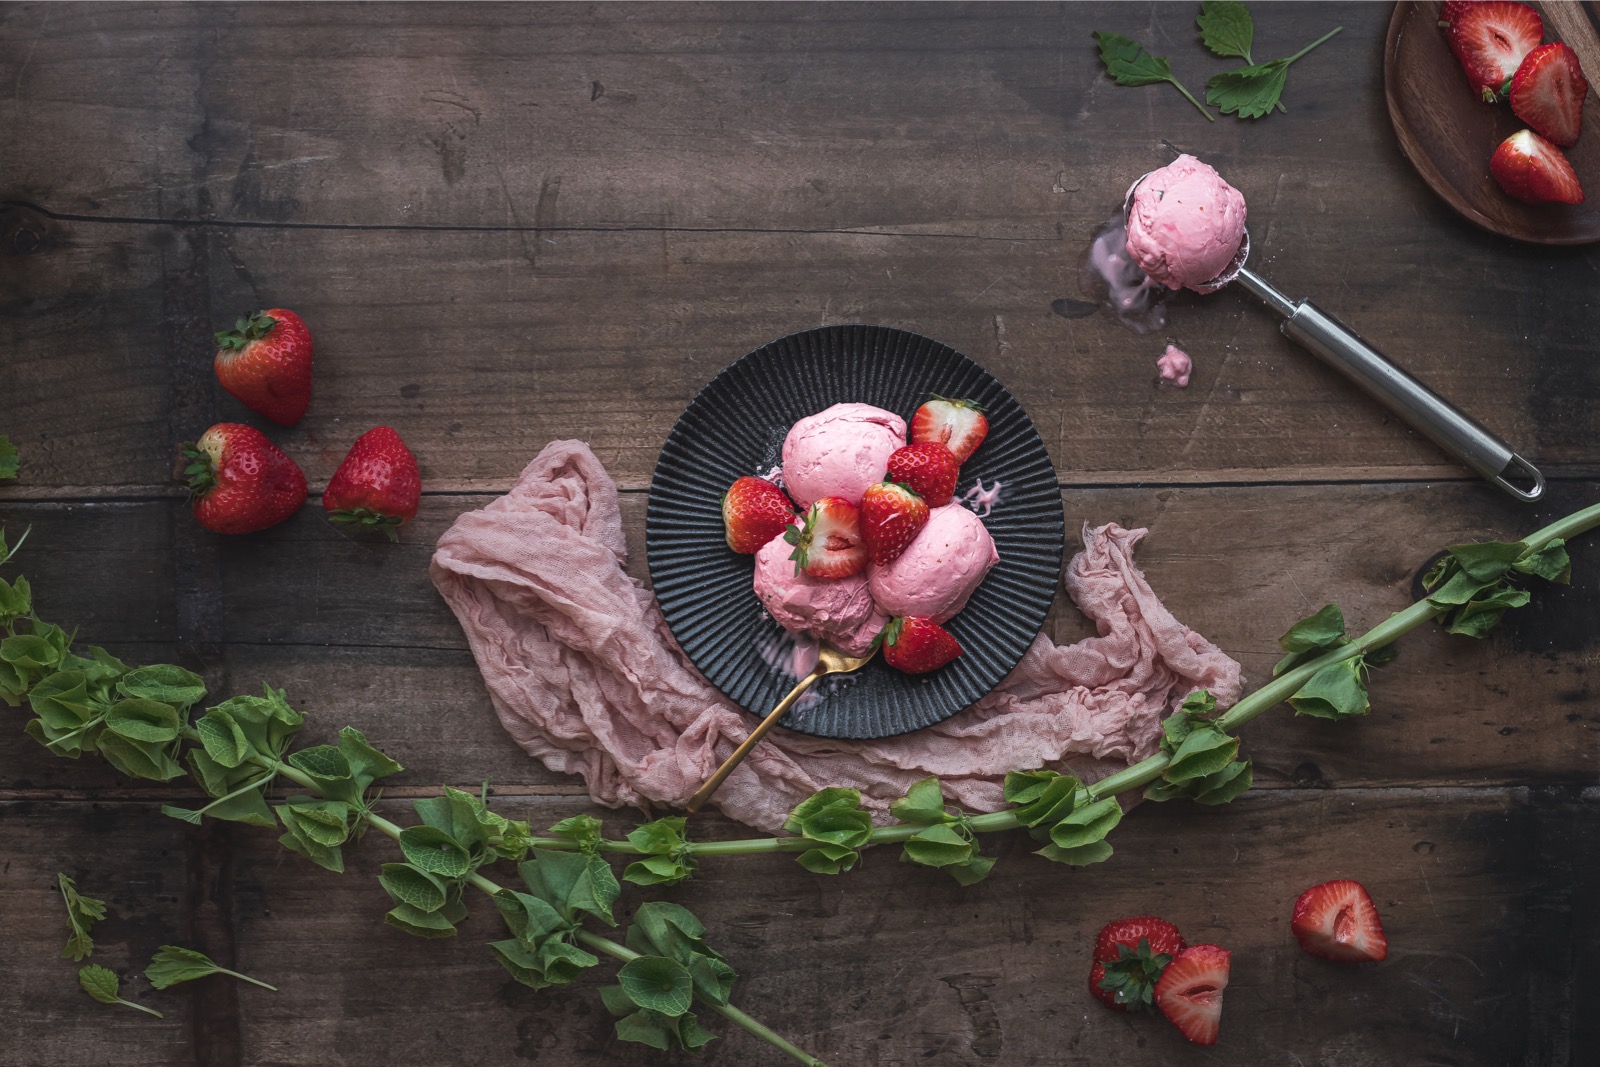 Love Match Quiz: What Type Of Partner Fascinates You Most? ❤️ Strawberry ice cream